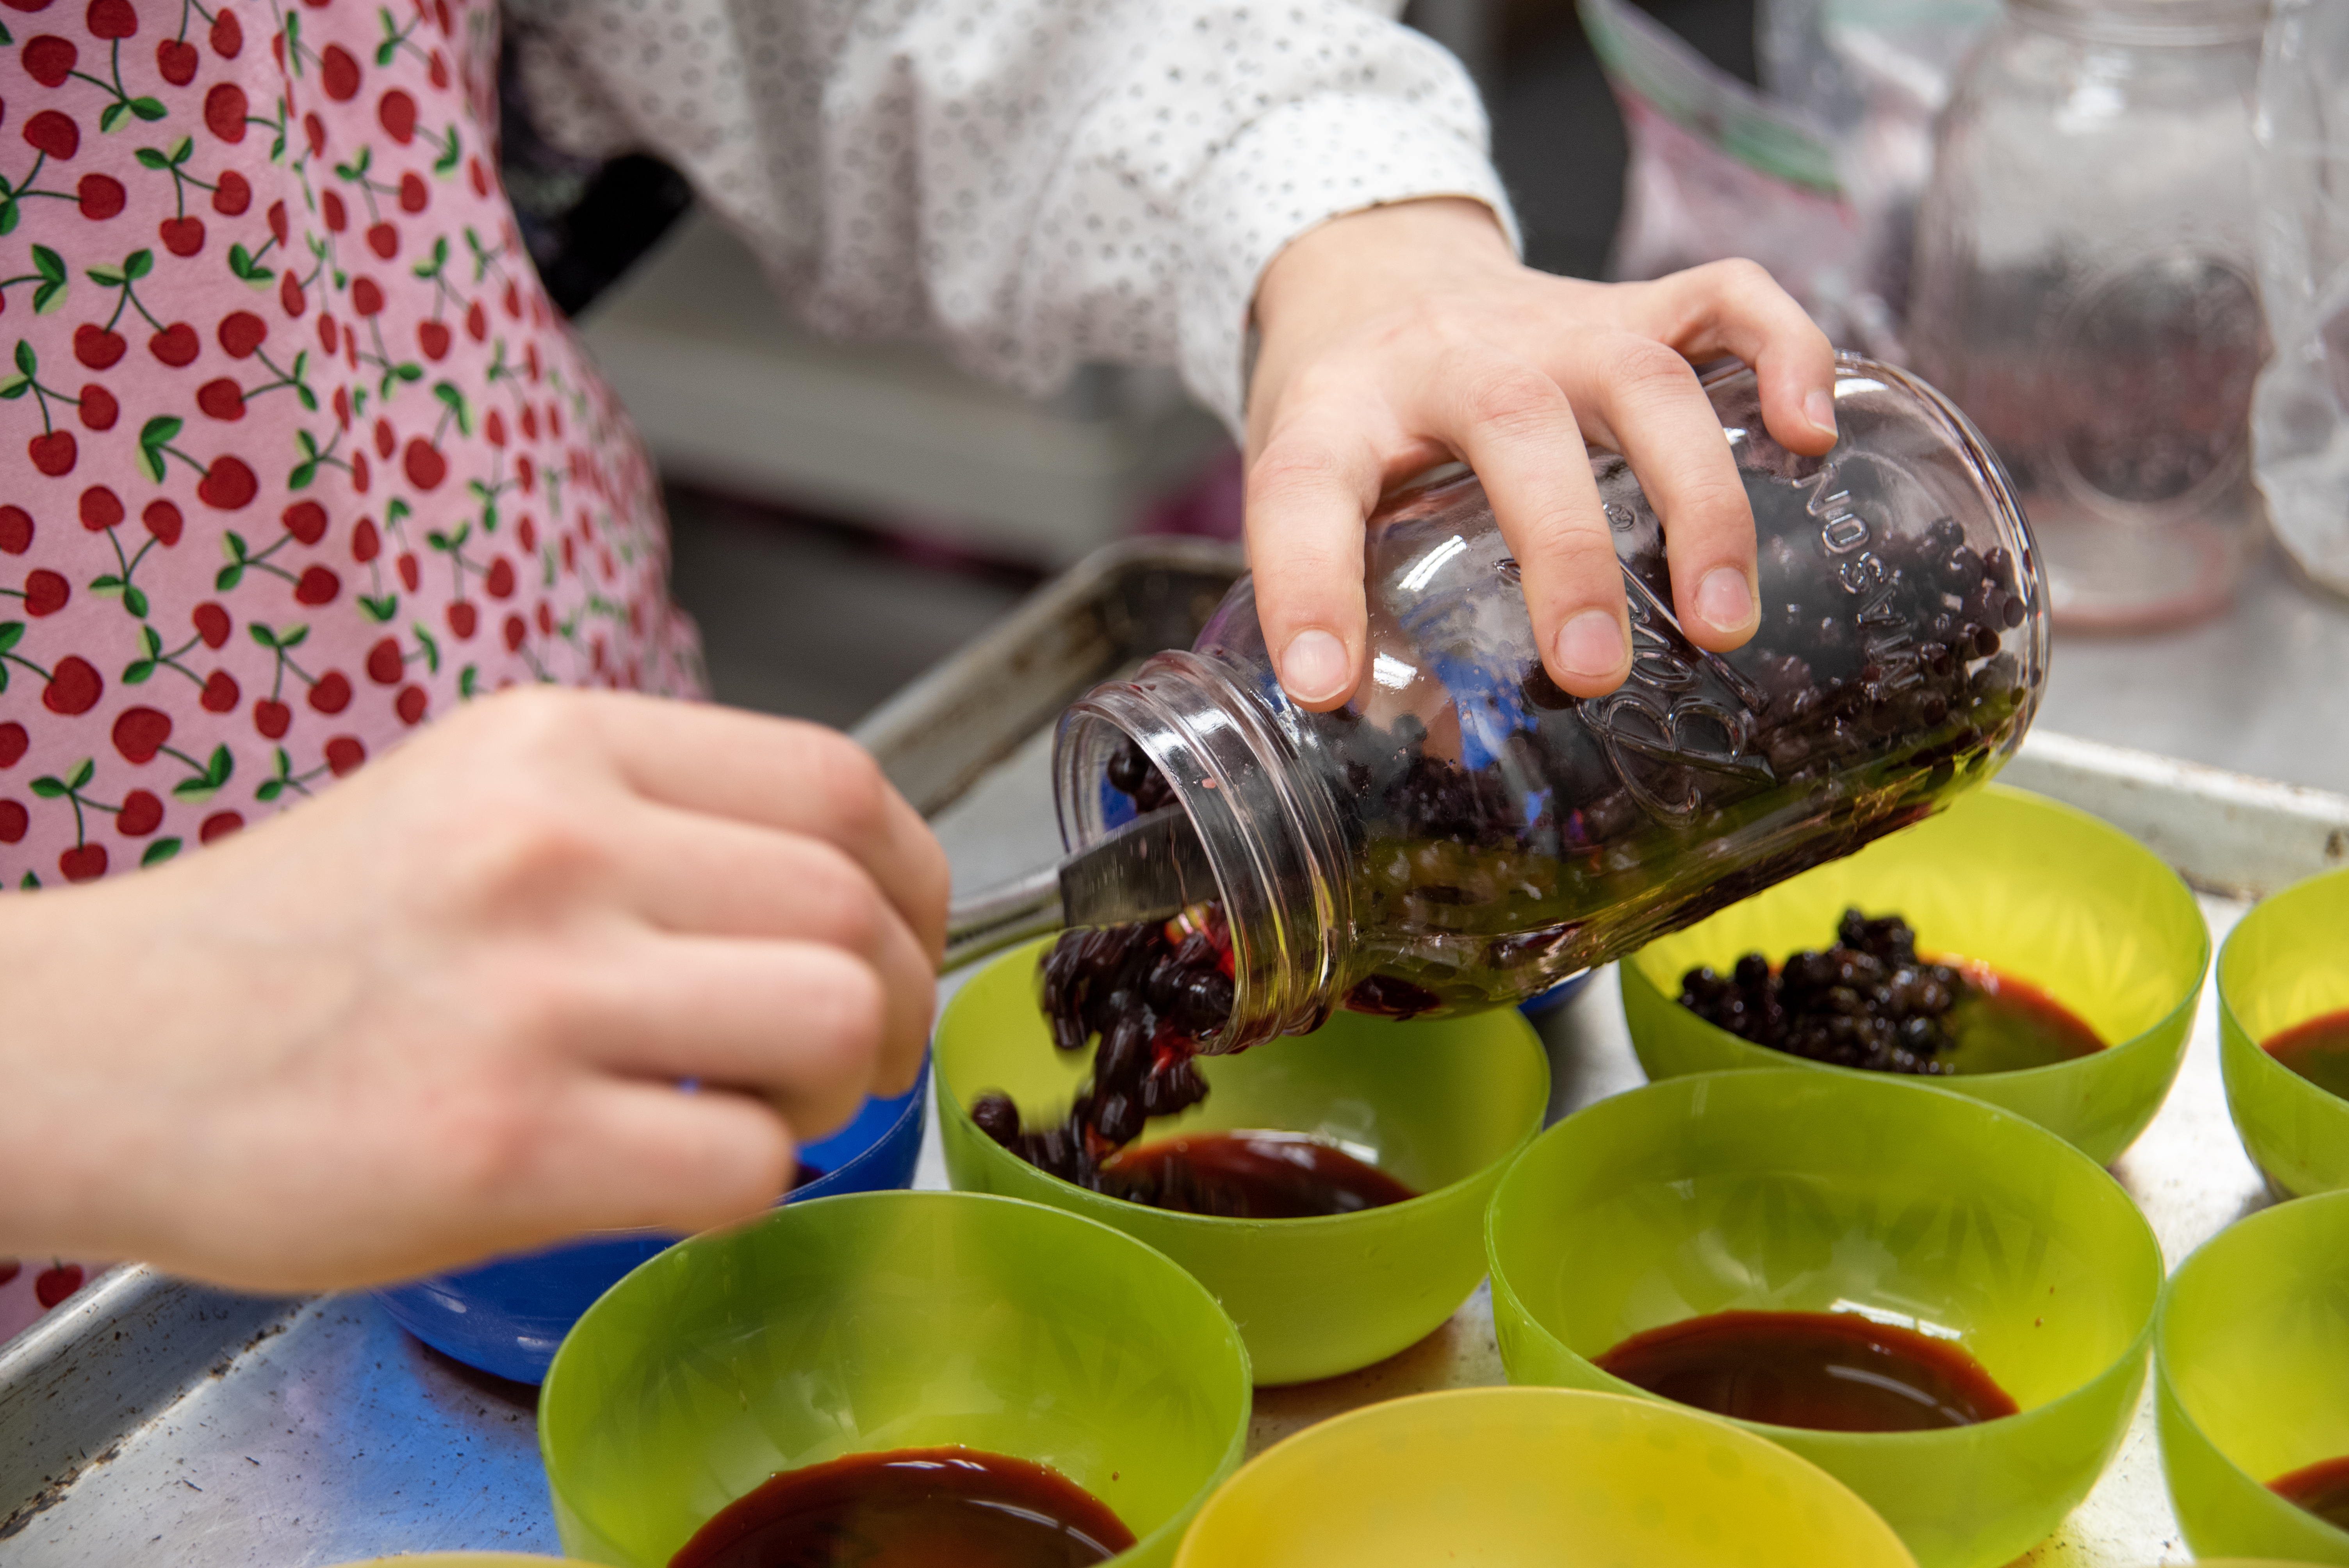 Cloe McMichael prepares trays of huckleberries, a sacred first food for Northwest tribes, for the Confederated Tribes of the Umatilla Indian Reservation annual Indian New Year feast on Dec. 21 in Mission, Oregon 